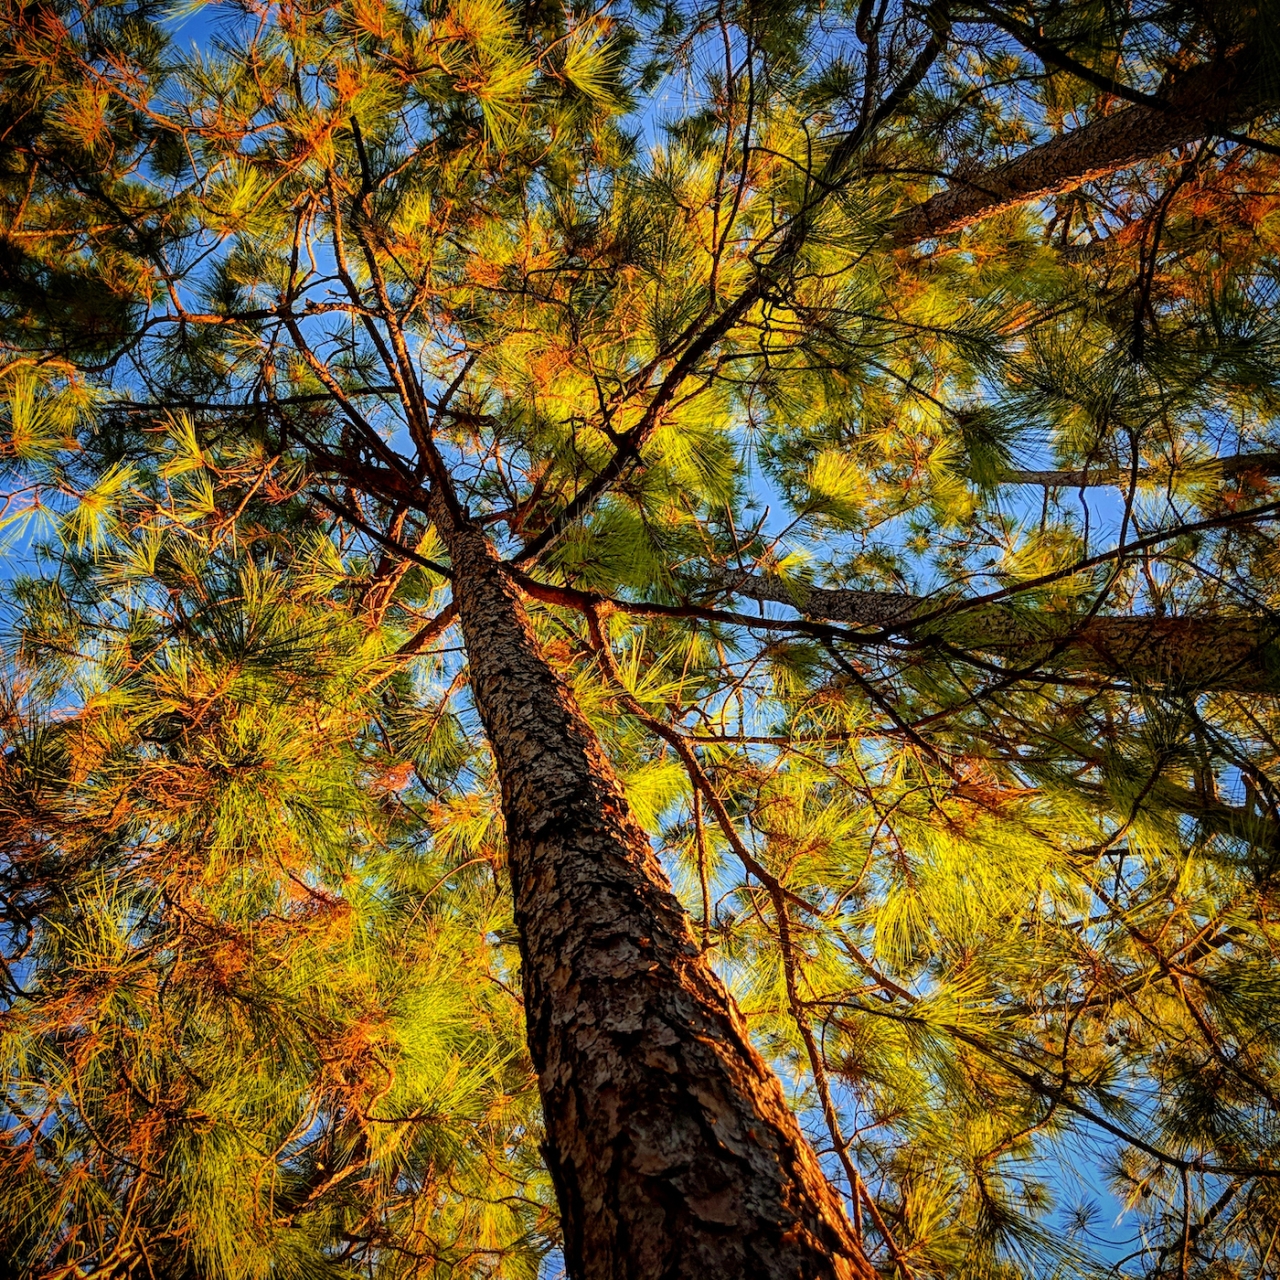 pine from below with the blue sky showing